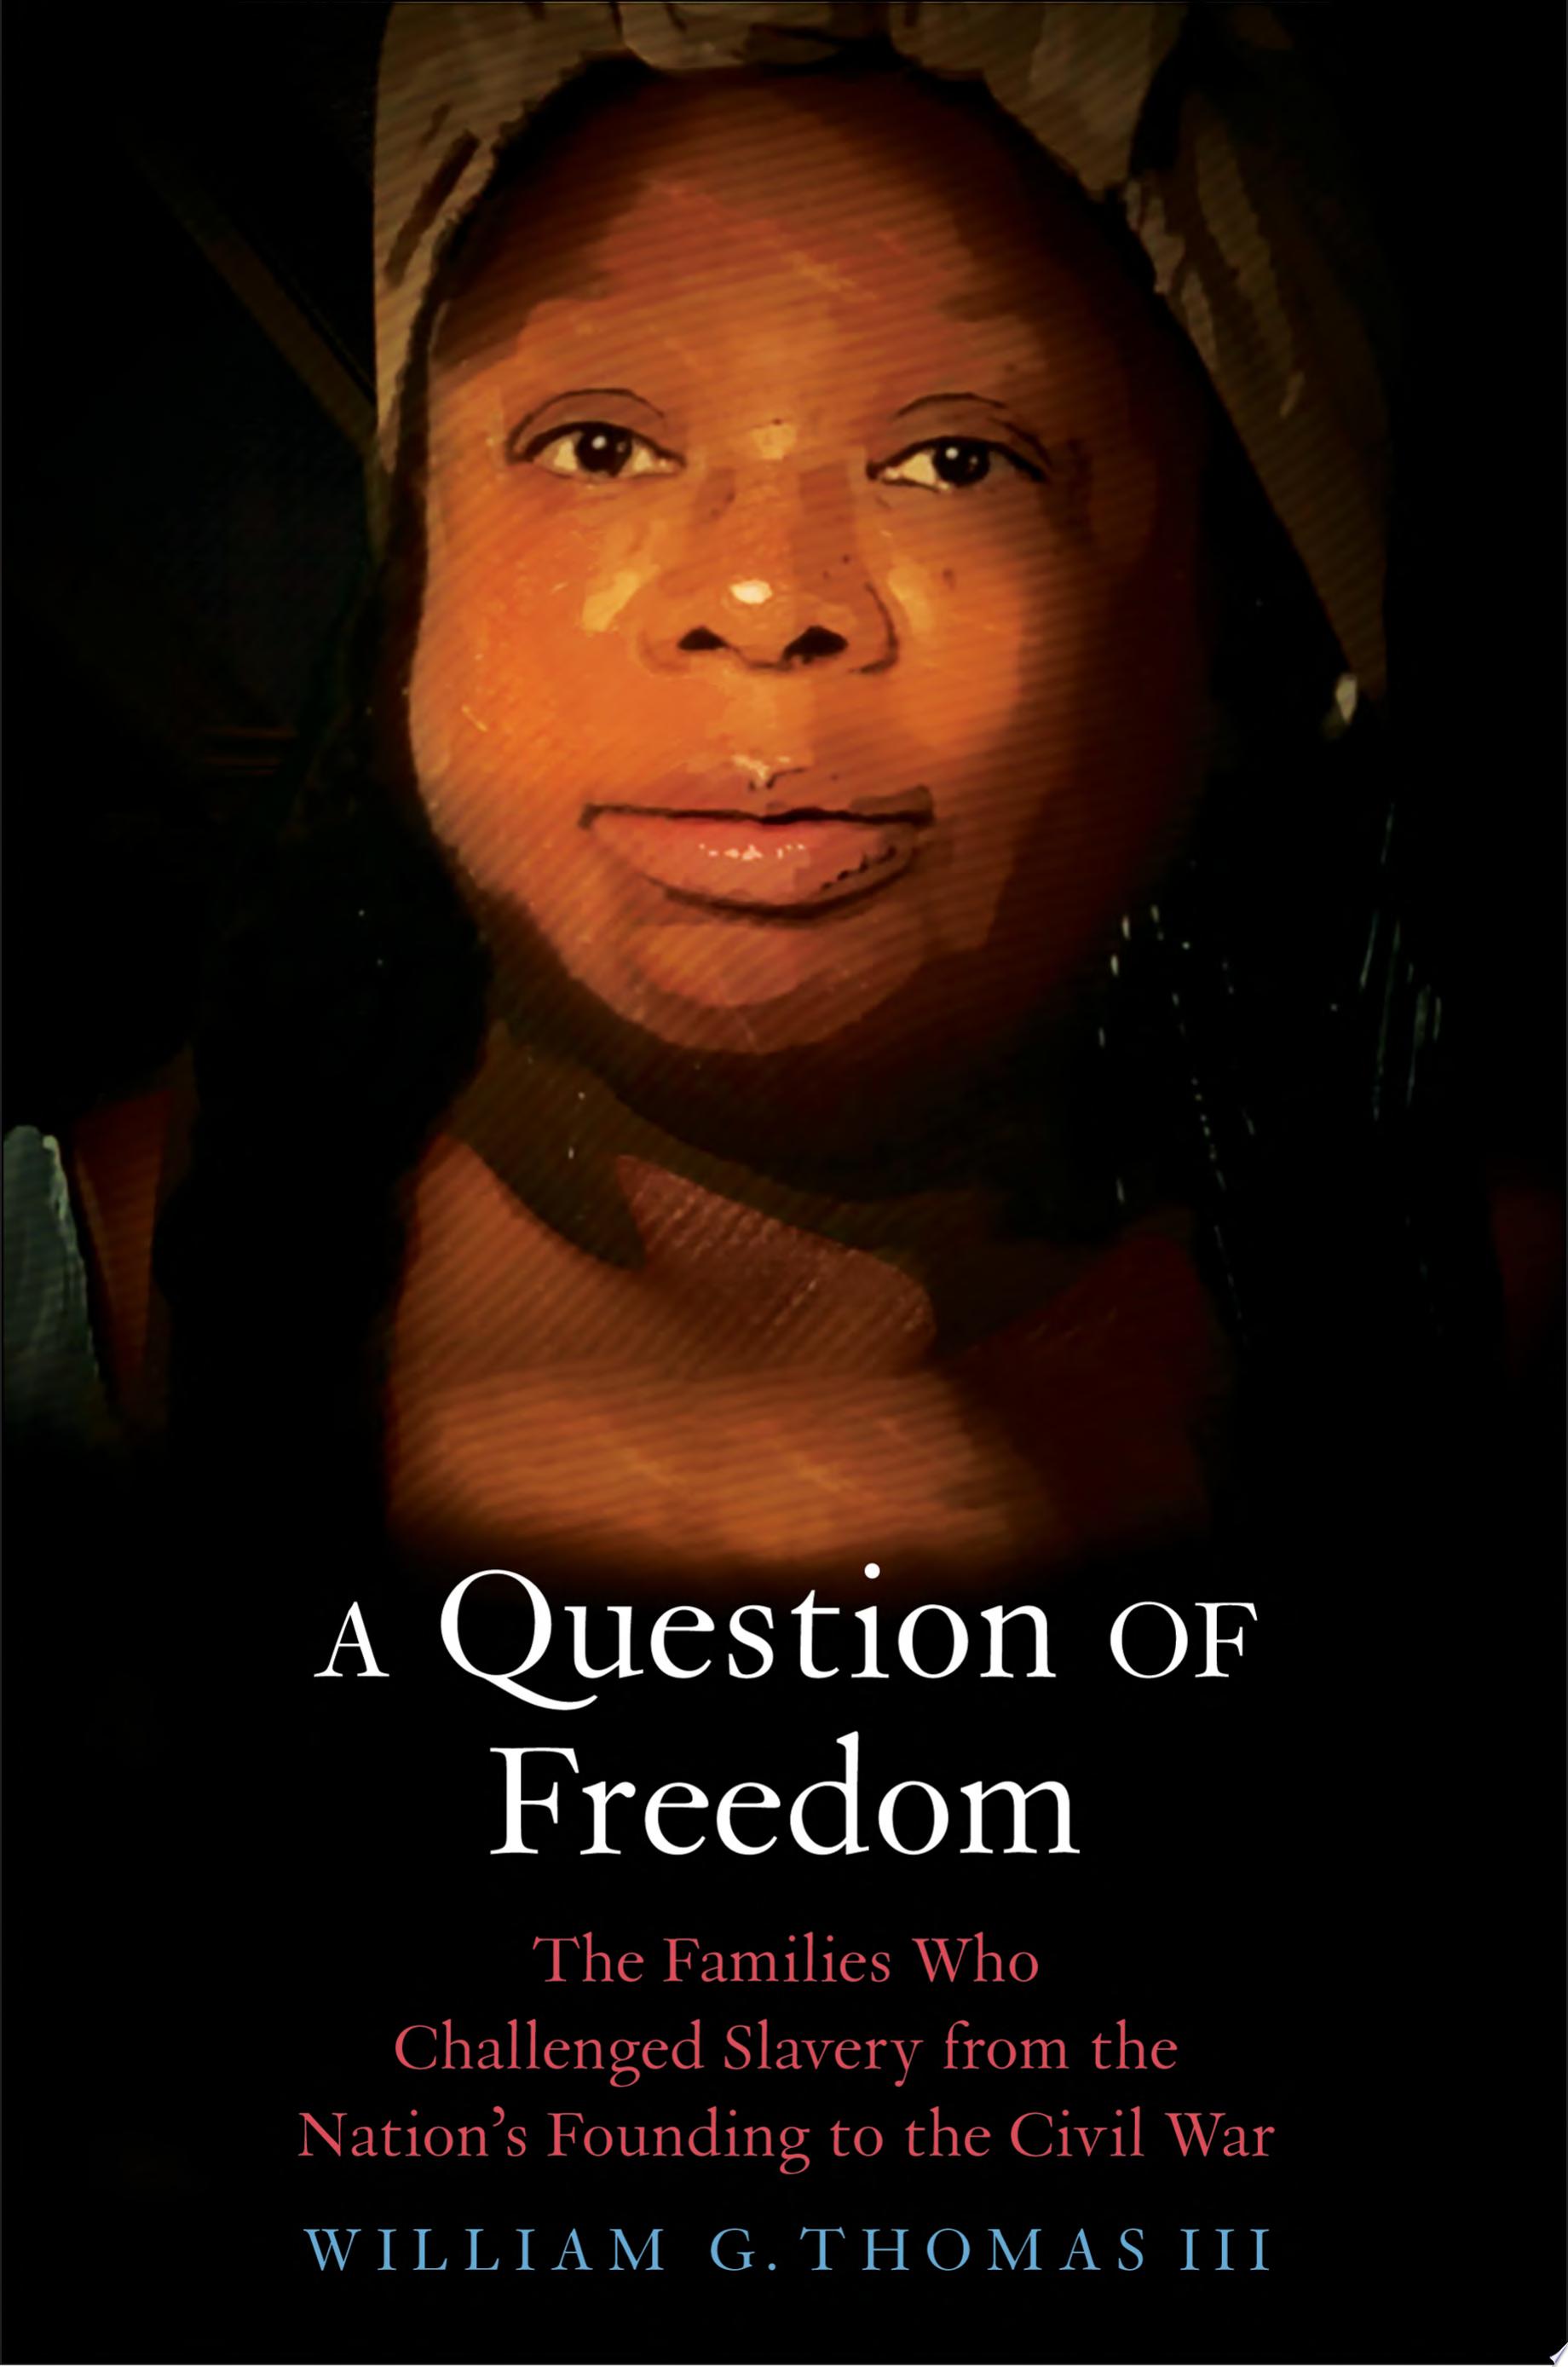 Image for "A Question of Freedom"